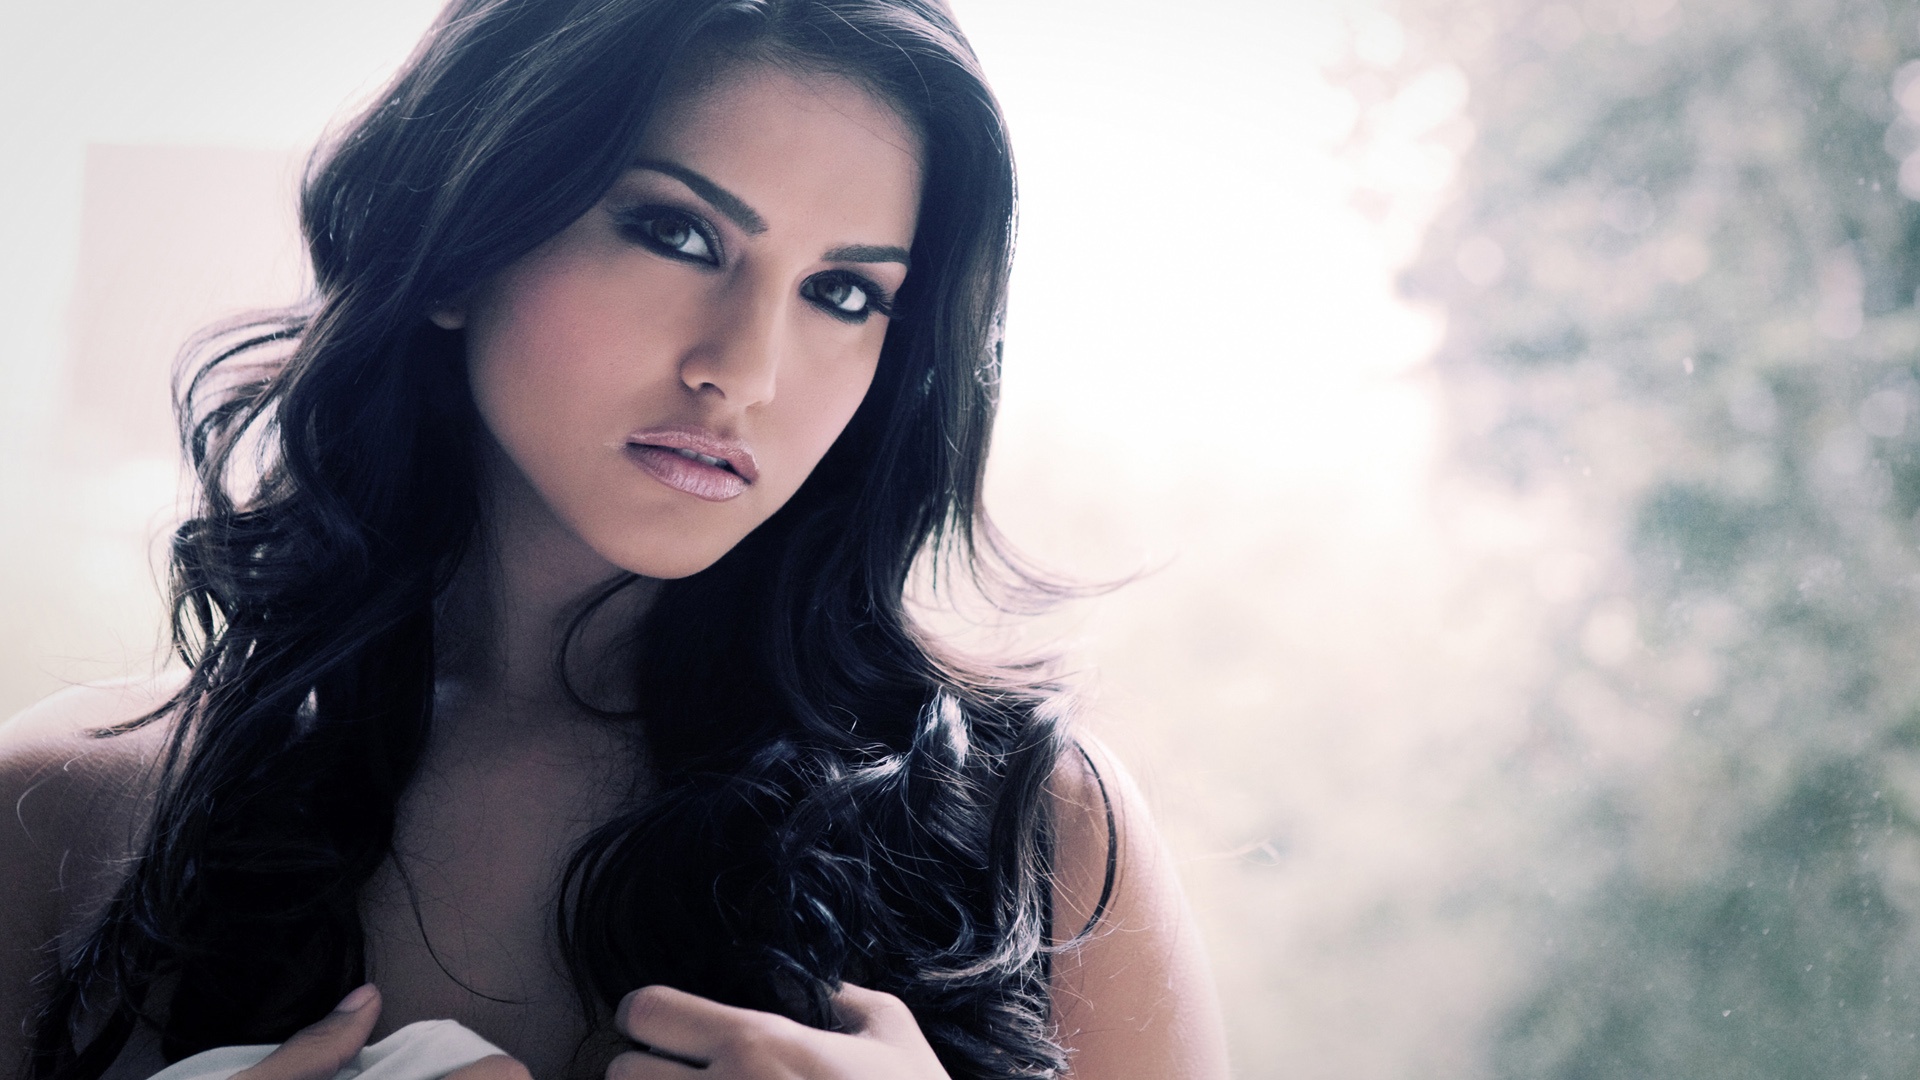 Sunny Leone High Definition Wallpapers Hd Wallpapers 